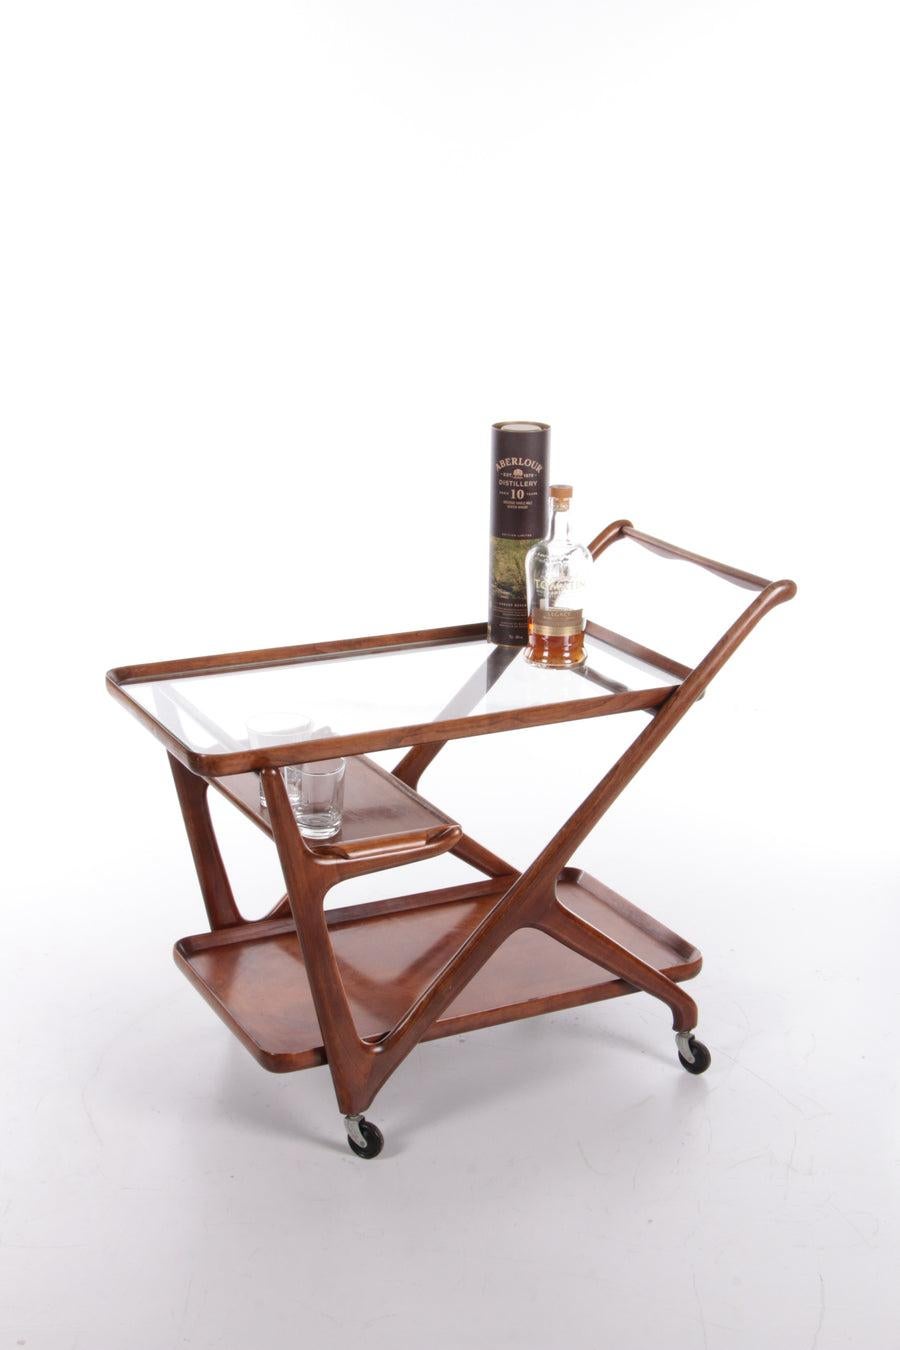 Italian Design Trolley by Cesare Lacca made by Cassina, 1950s